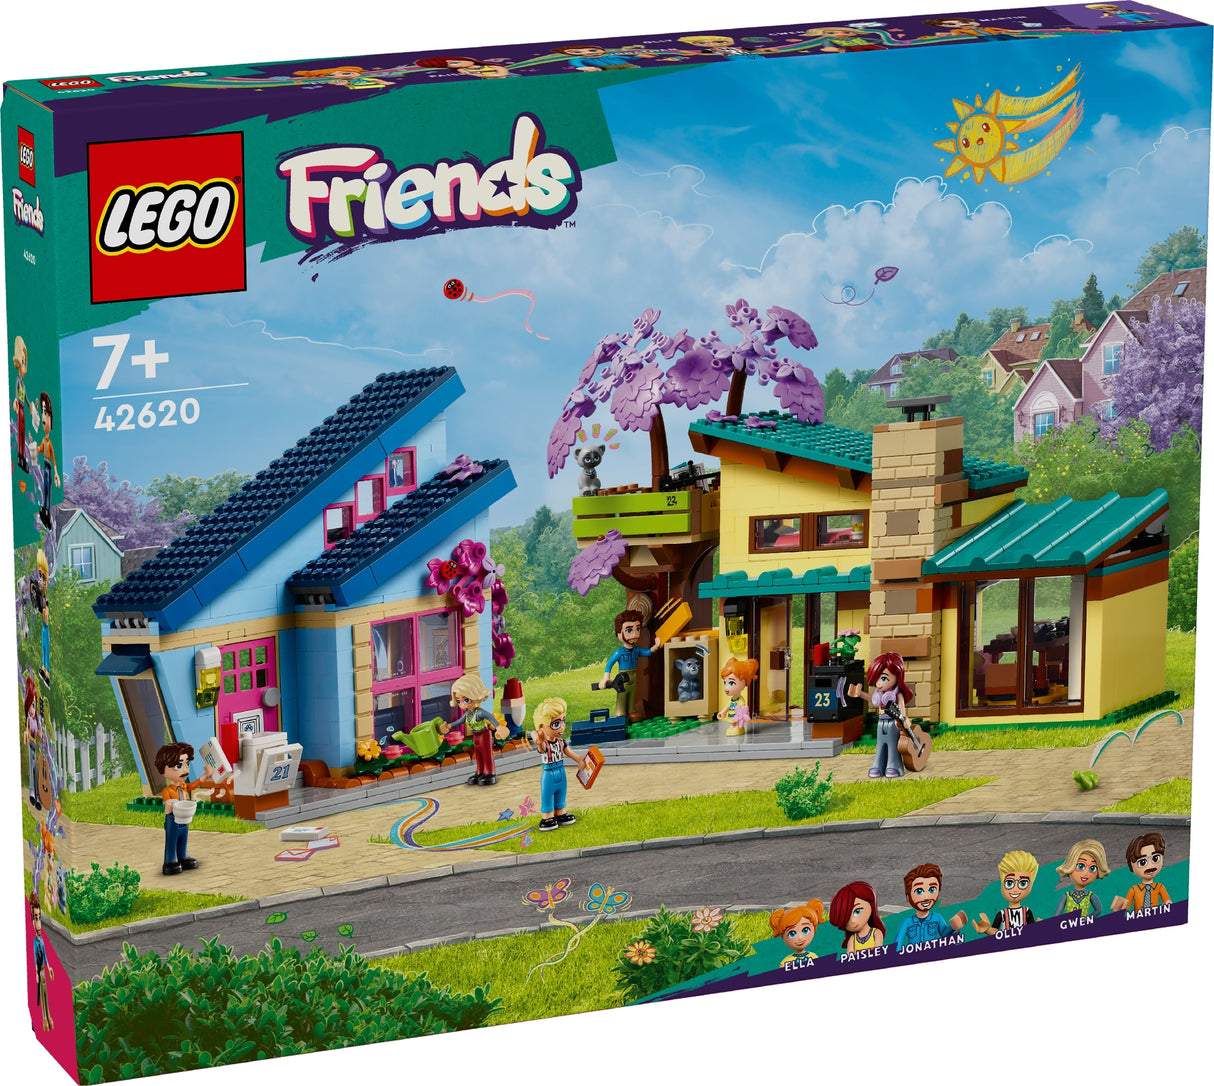 LEGO FRIENDS OLLY AND PAISLEY'S FAMILY HOUSES 42620 AGE: 7+